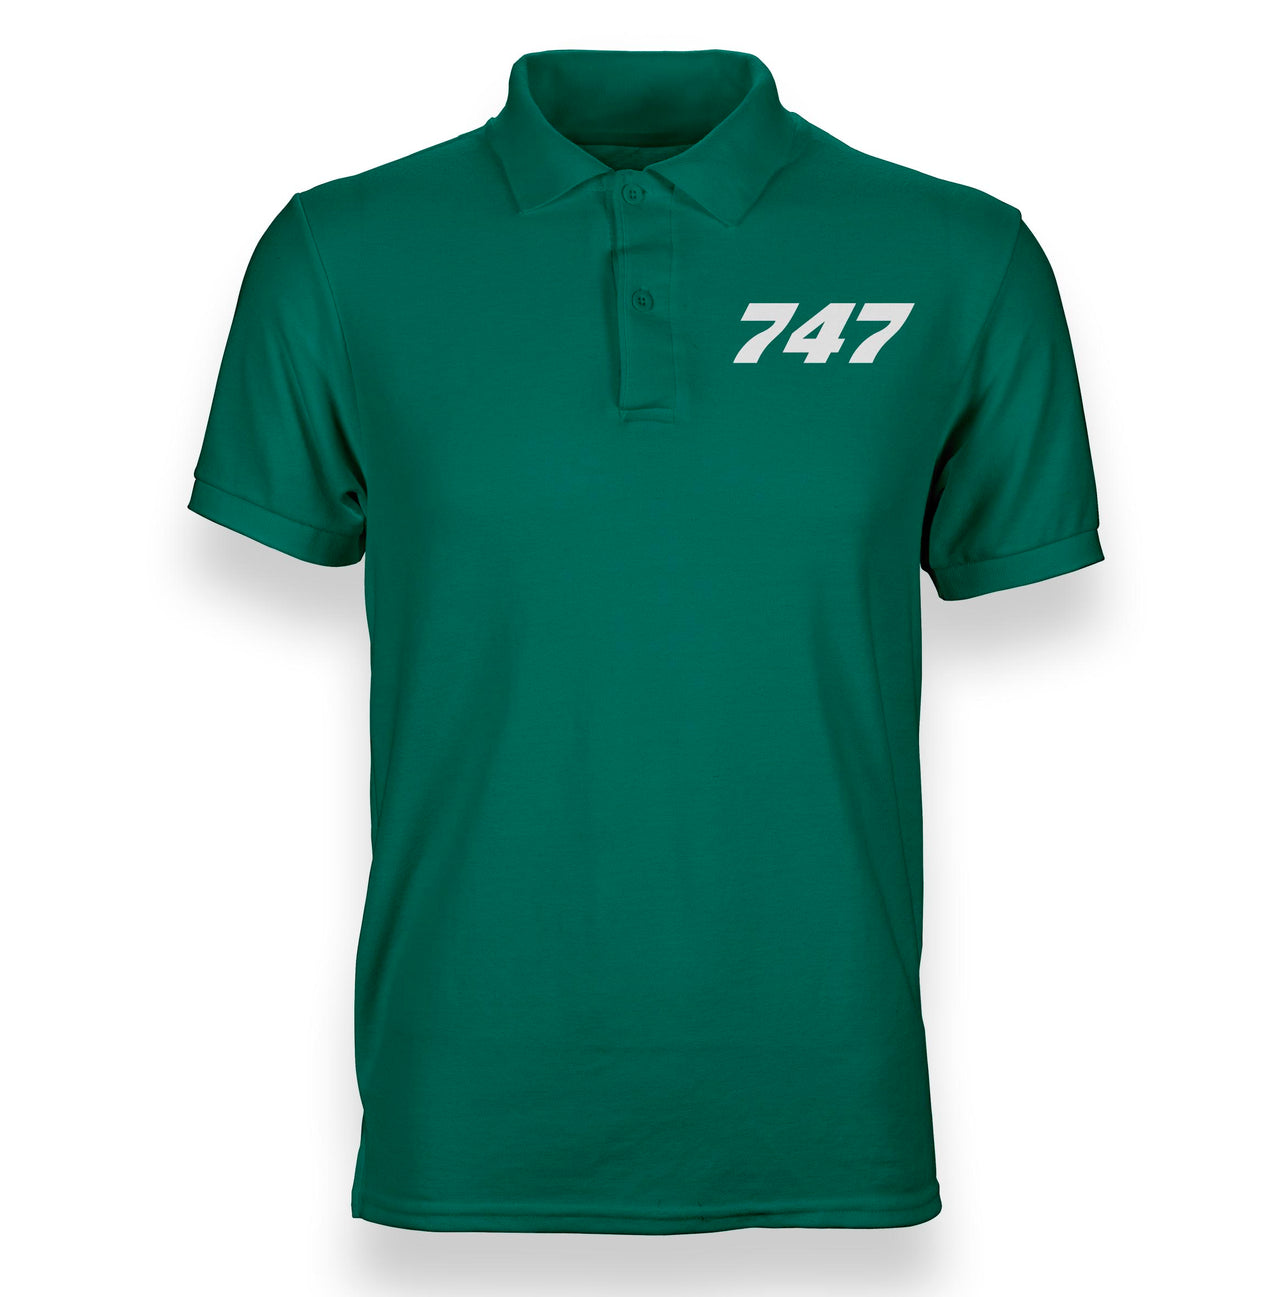 Boeing 747 Flat Text Designed Polo T-Shirts